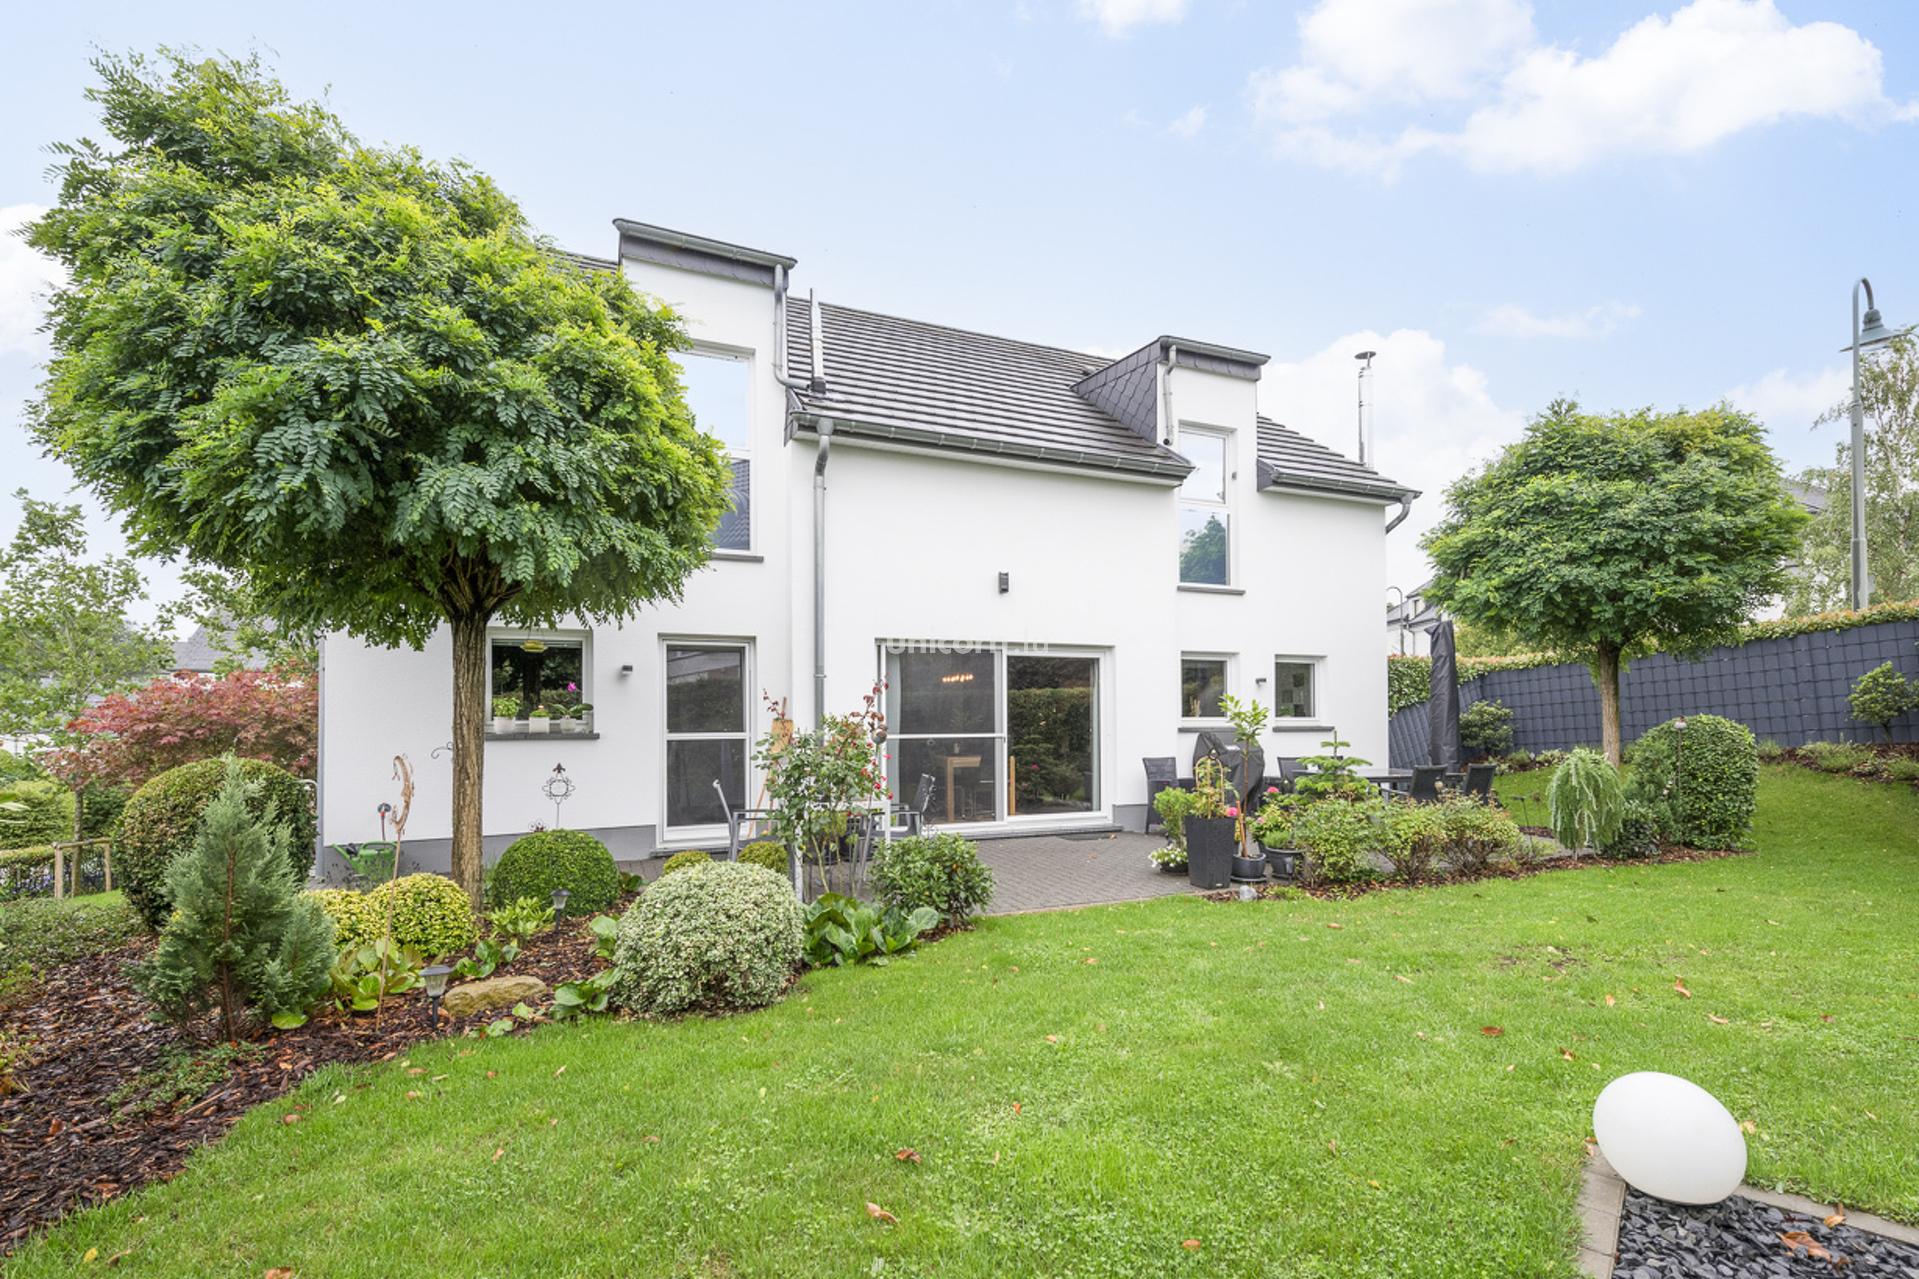 House for sale in Junglinster  - 350m²